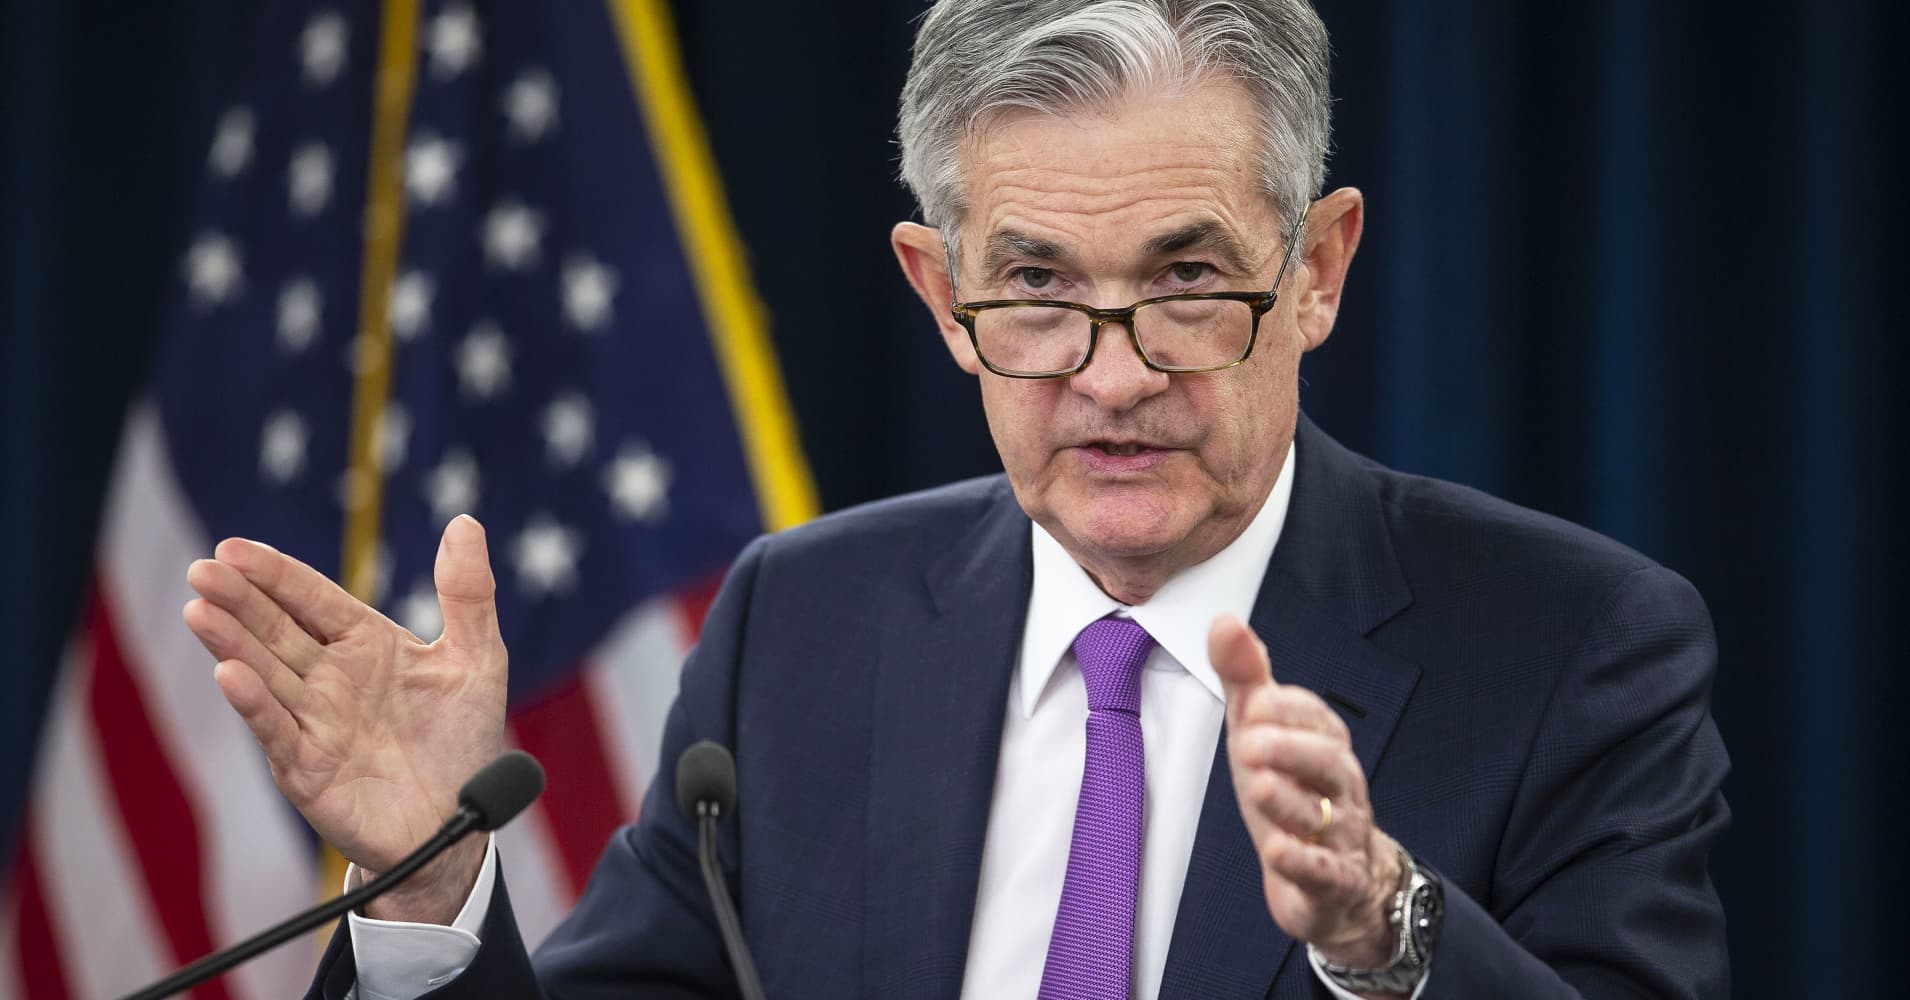 Watch Fed Chair Jerome Powell speak live at economic forum in Mississippi